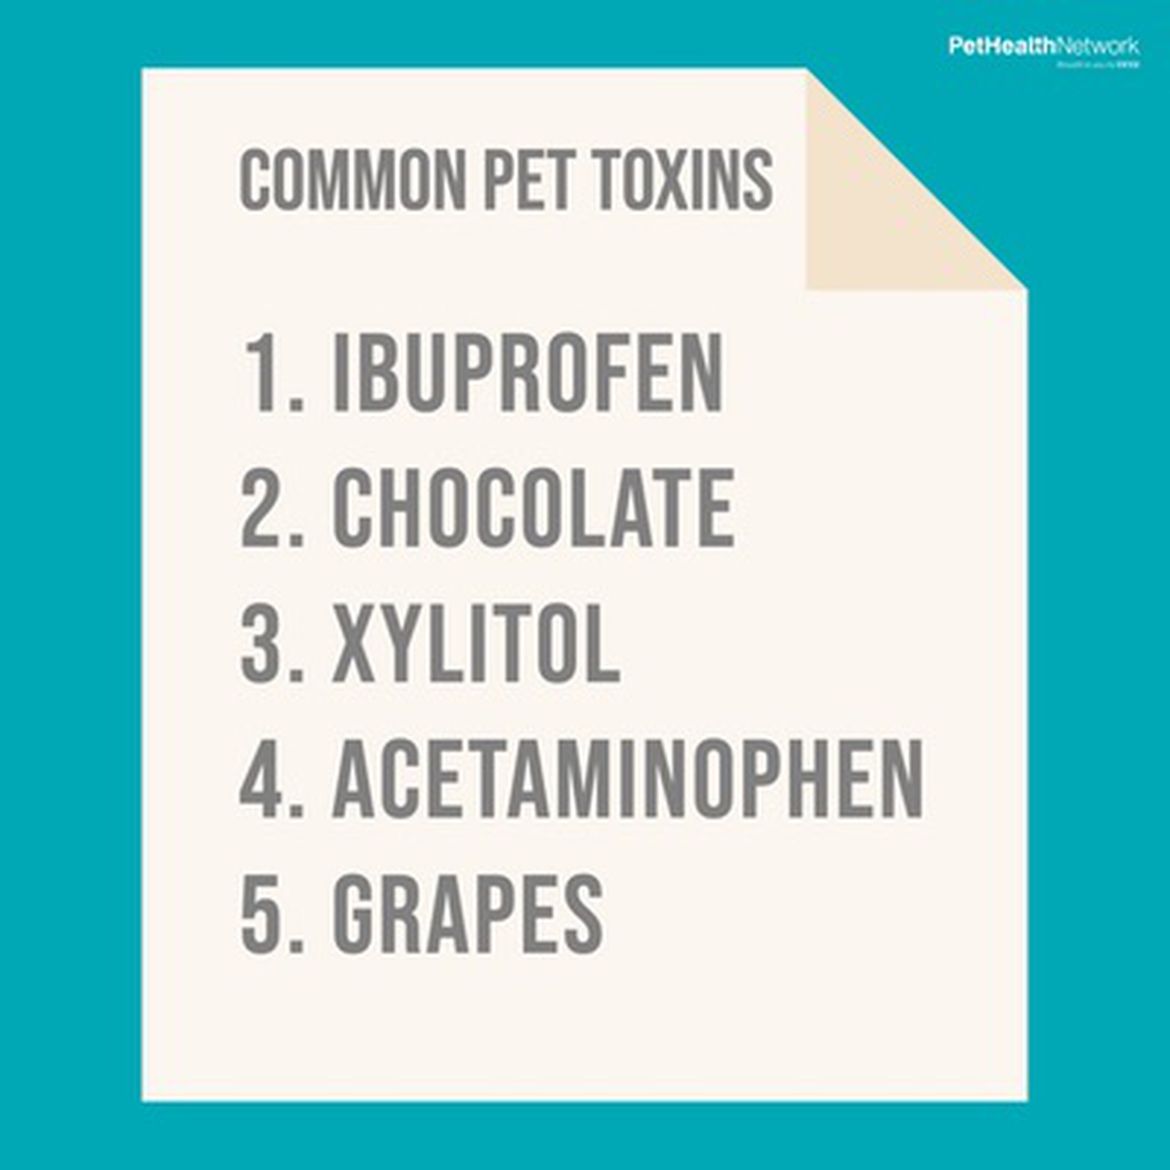 Social media post about common pet poisons.